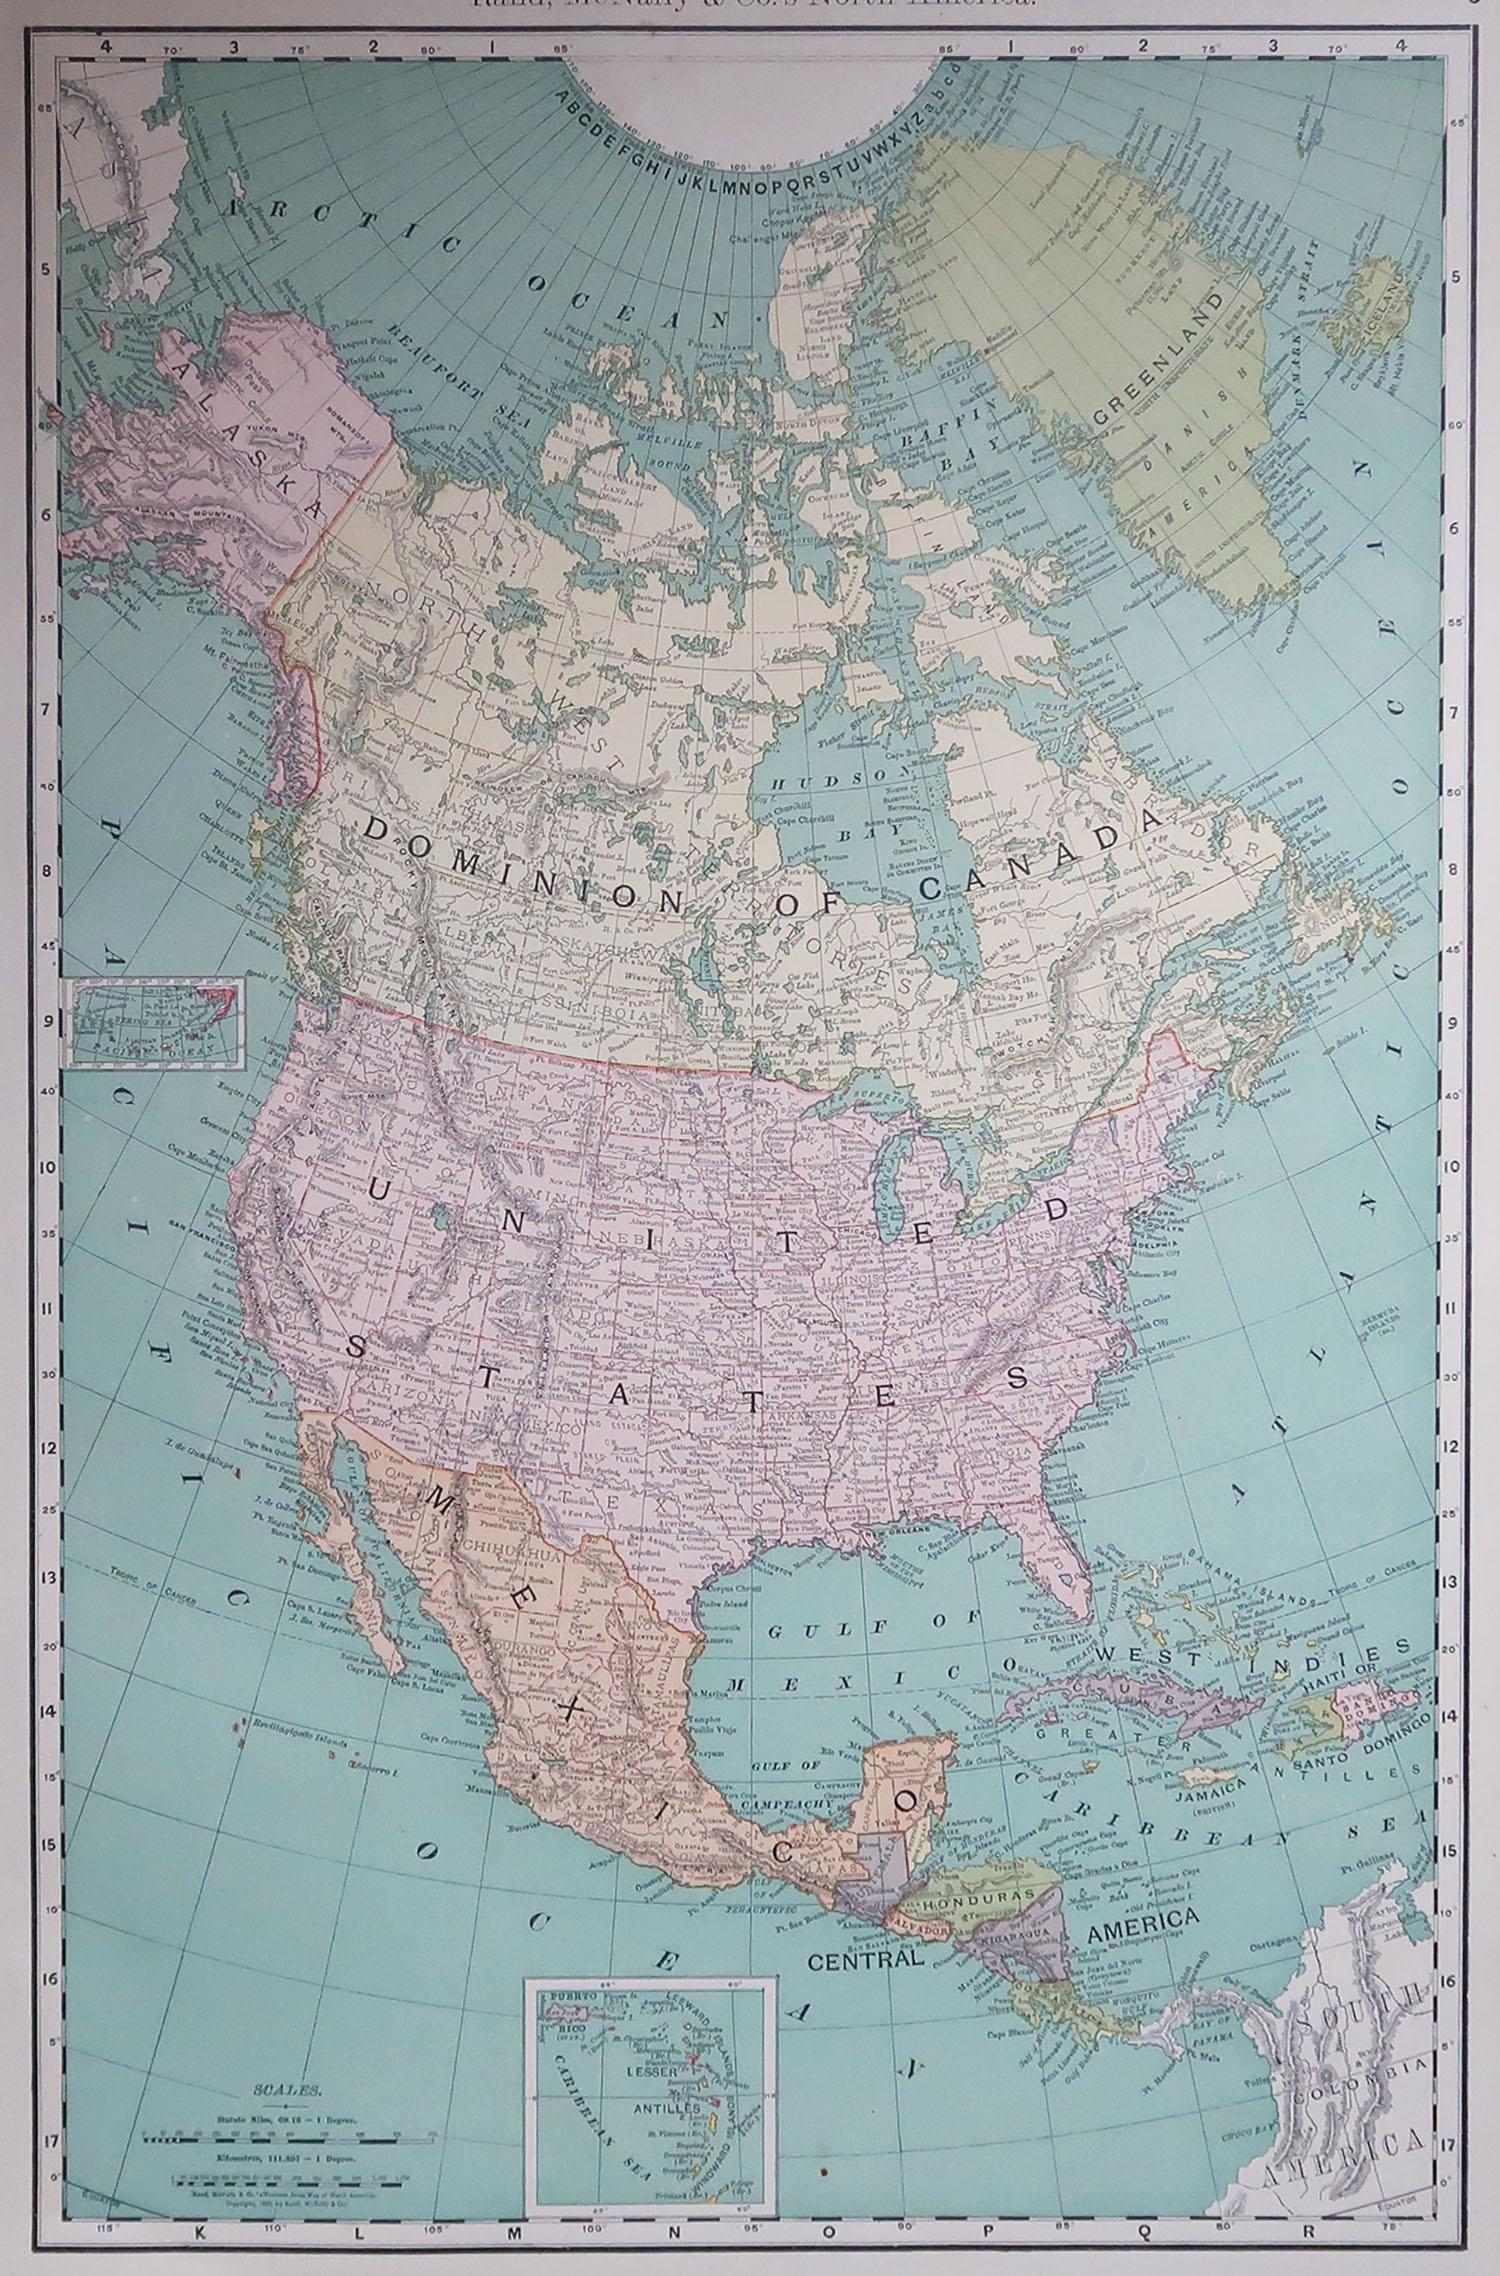 Fabulous map of North America

Original color

By Rand, McNally & Co.

Dated 1891

Unframed

Free shipping.